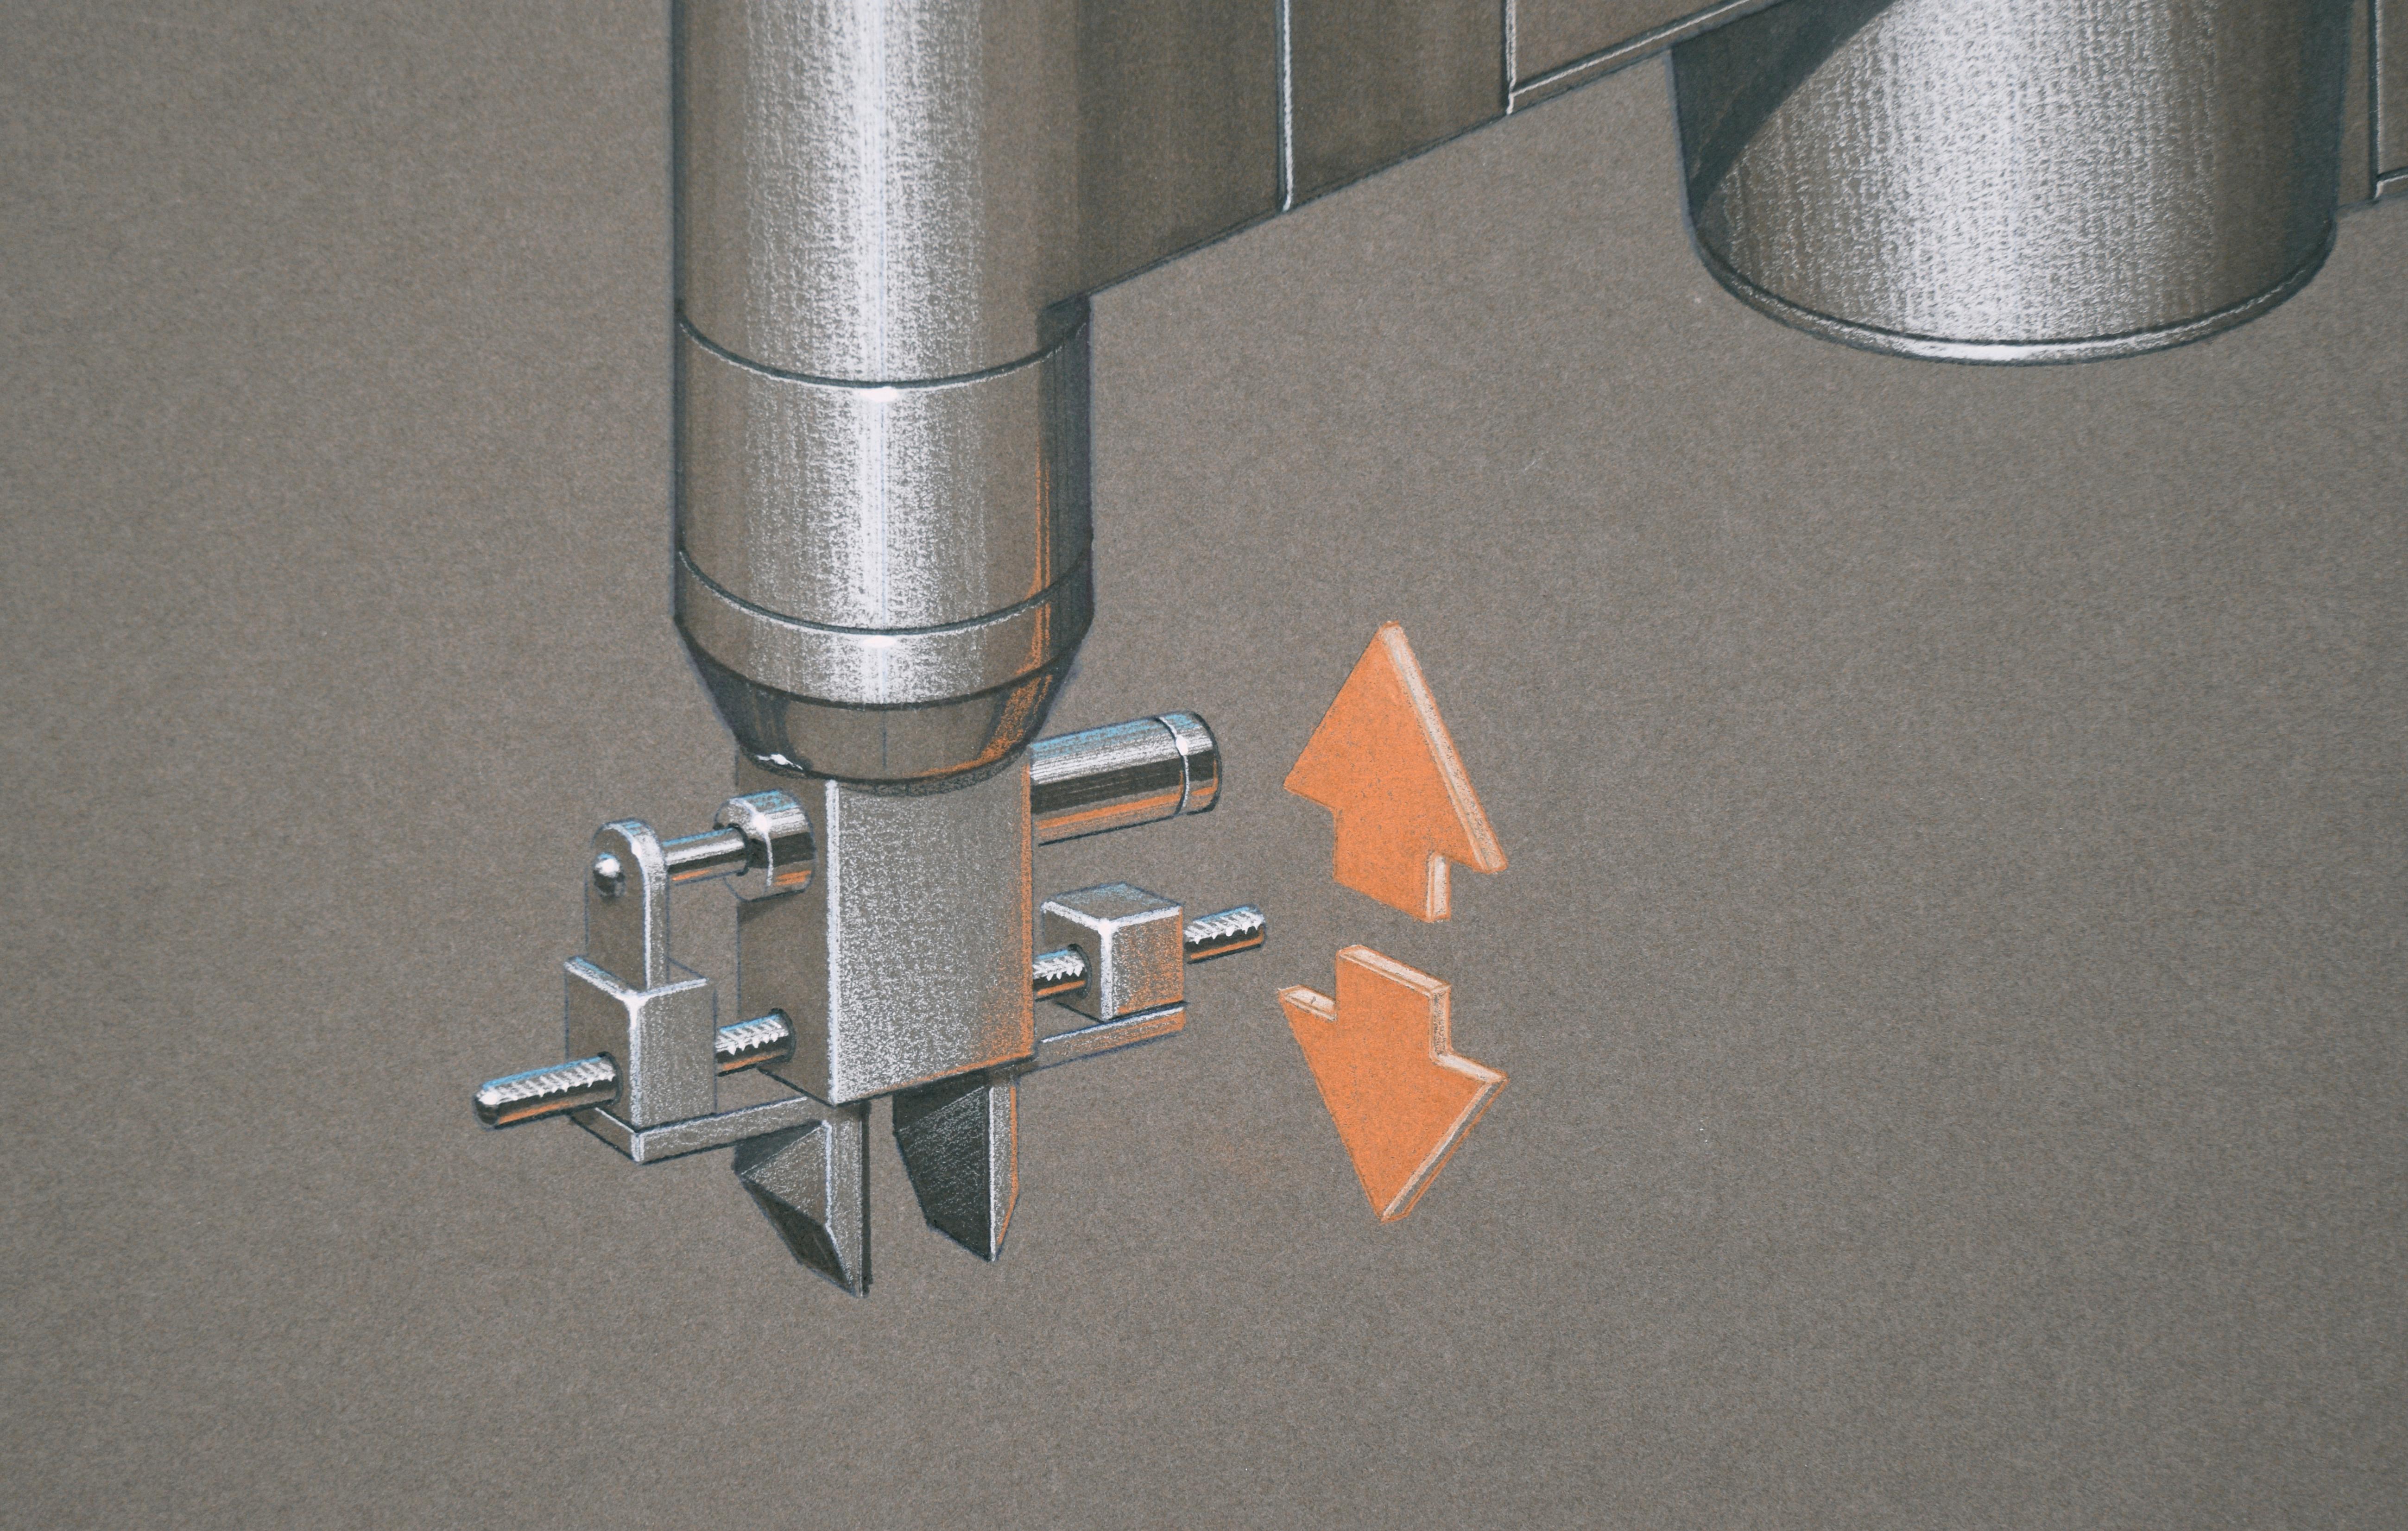 Design-quality illustrations of Intelledex machinery by Edward T. Liljenwall (American, 1943-2010). The machine is expertly rendered, with smooth shading and specific details. Highlights to the metal are added in gouache, creating a realistic